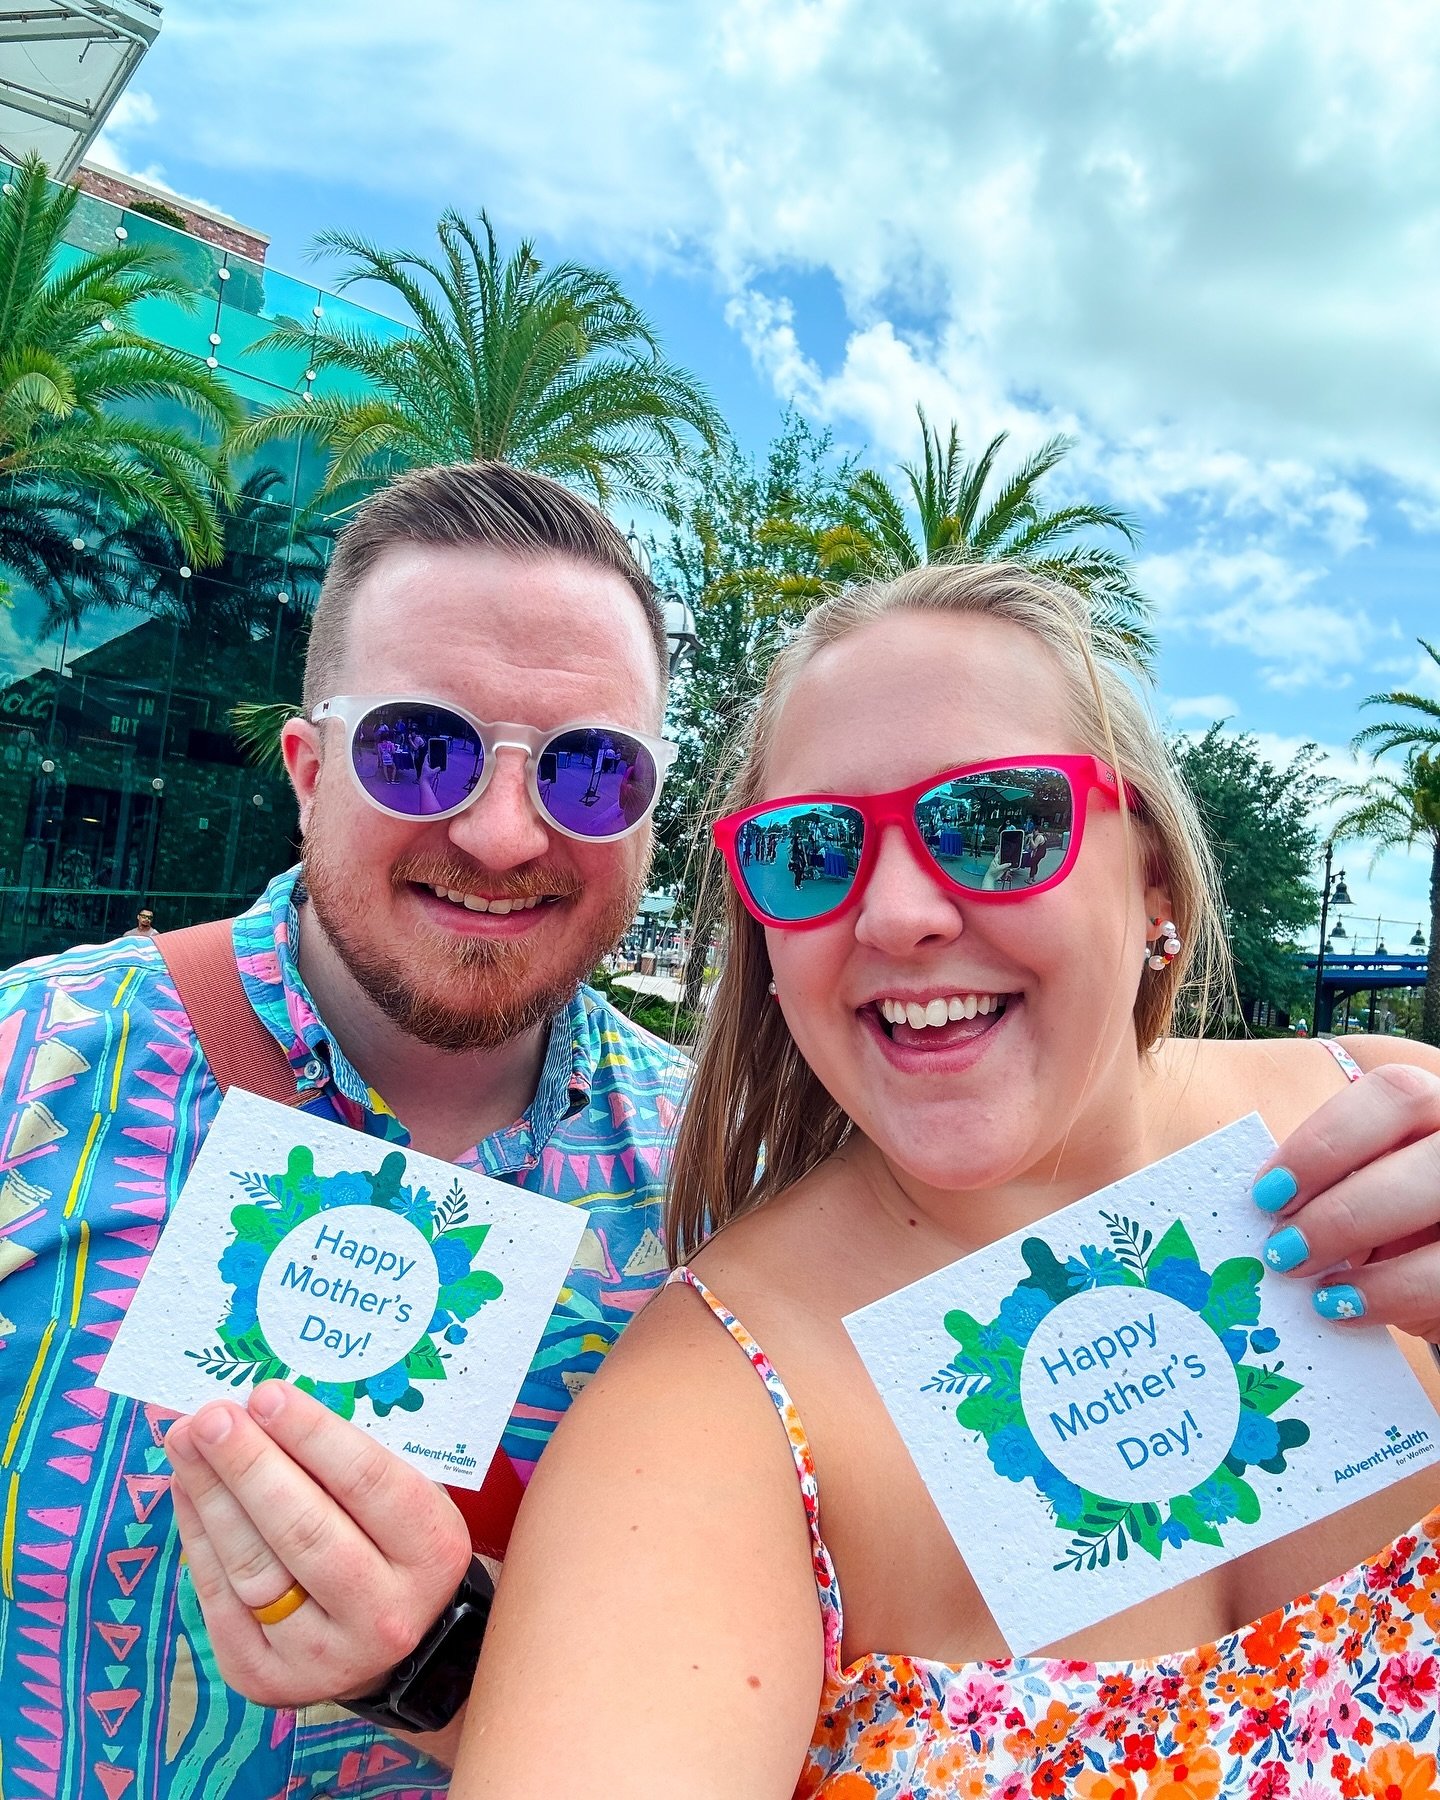 Hitting up Disney Springs before Mother&rsquo;s Day? Fridays, Saturdays, and Sundays you can make your own Mother&rsquo;s Day post card to send to your mom for FREE! You can find this little pop up stand in between the AMC Theatre and Coca Cola Store